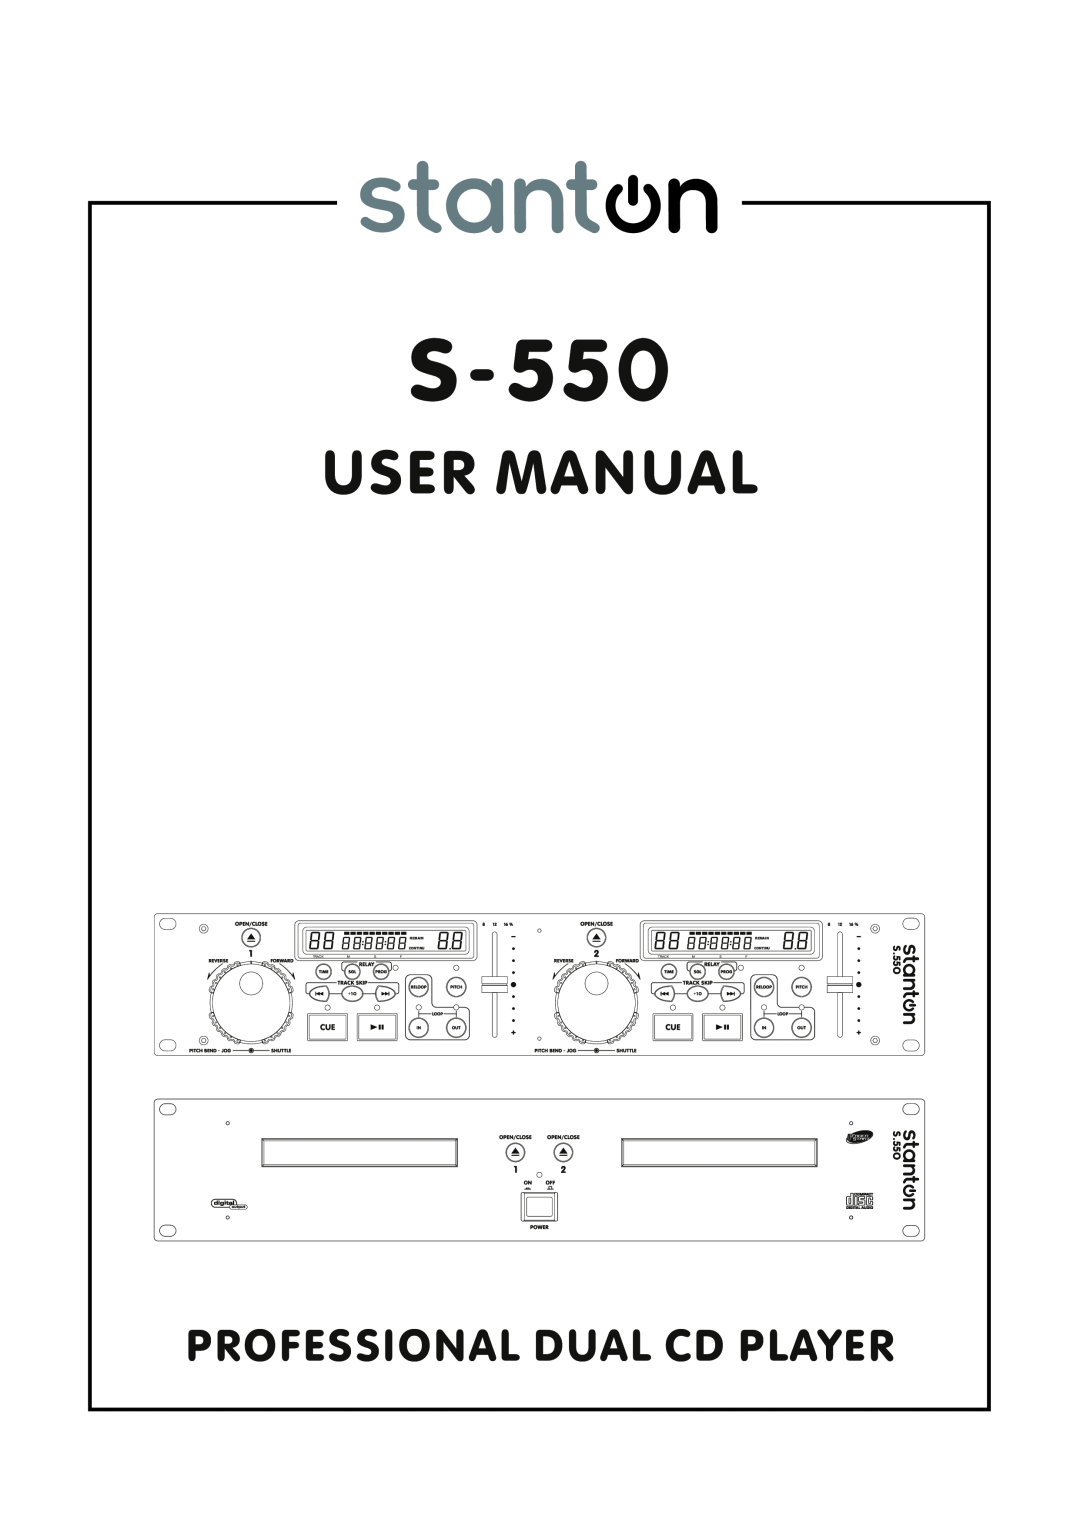 Stanton S.550 user manual Professional Dual Cd Player, Remain, Continu, Trackmsf 